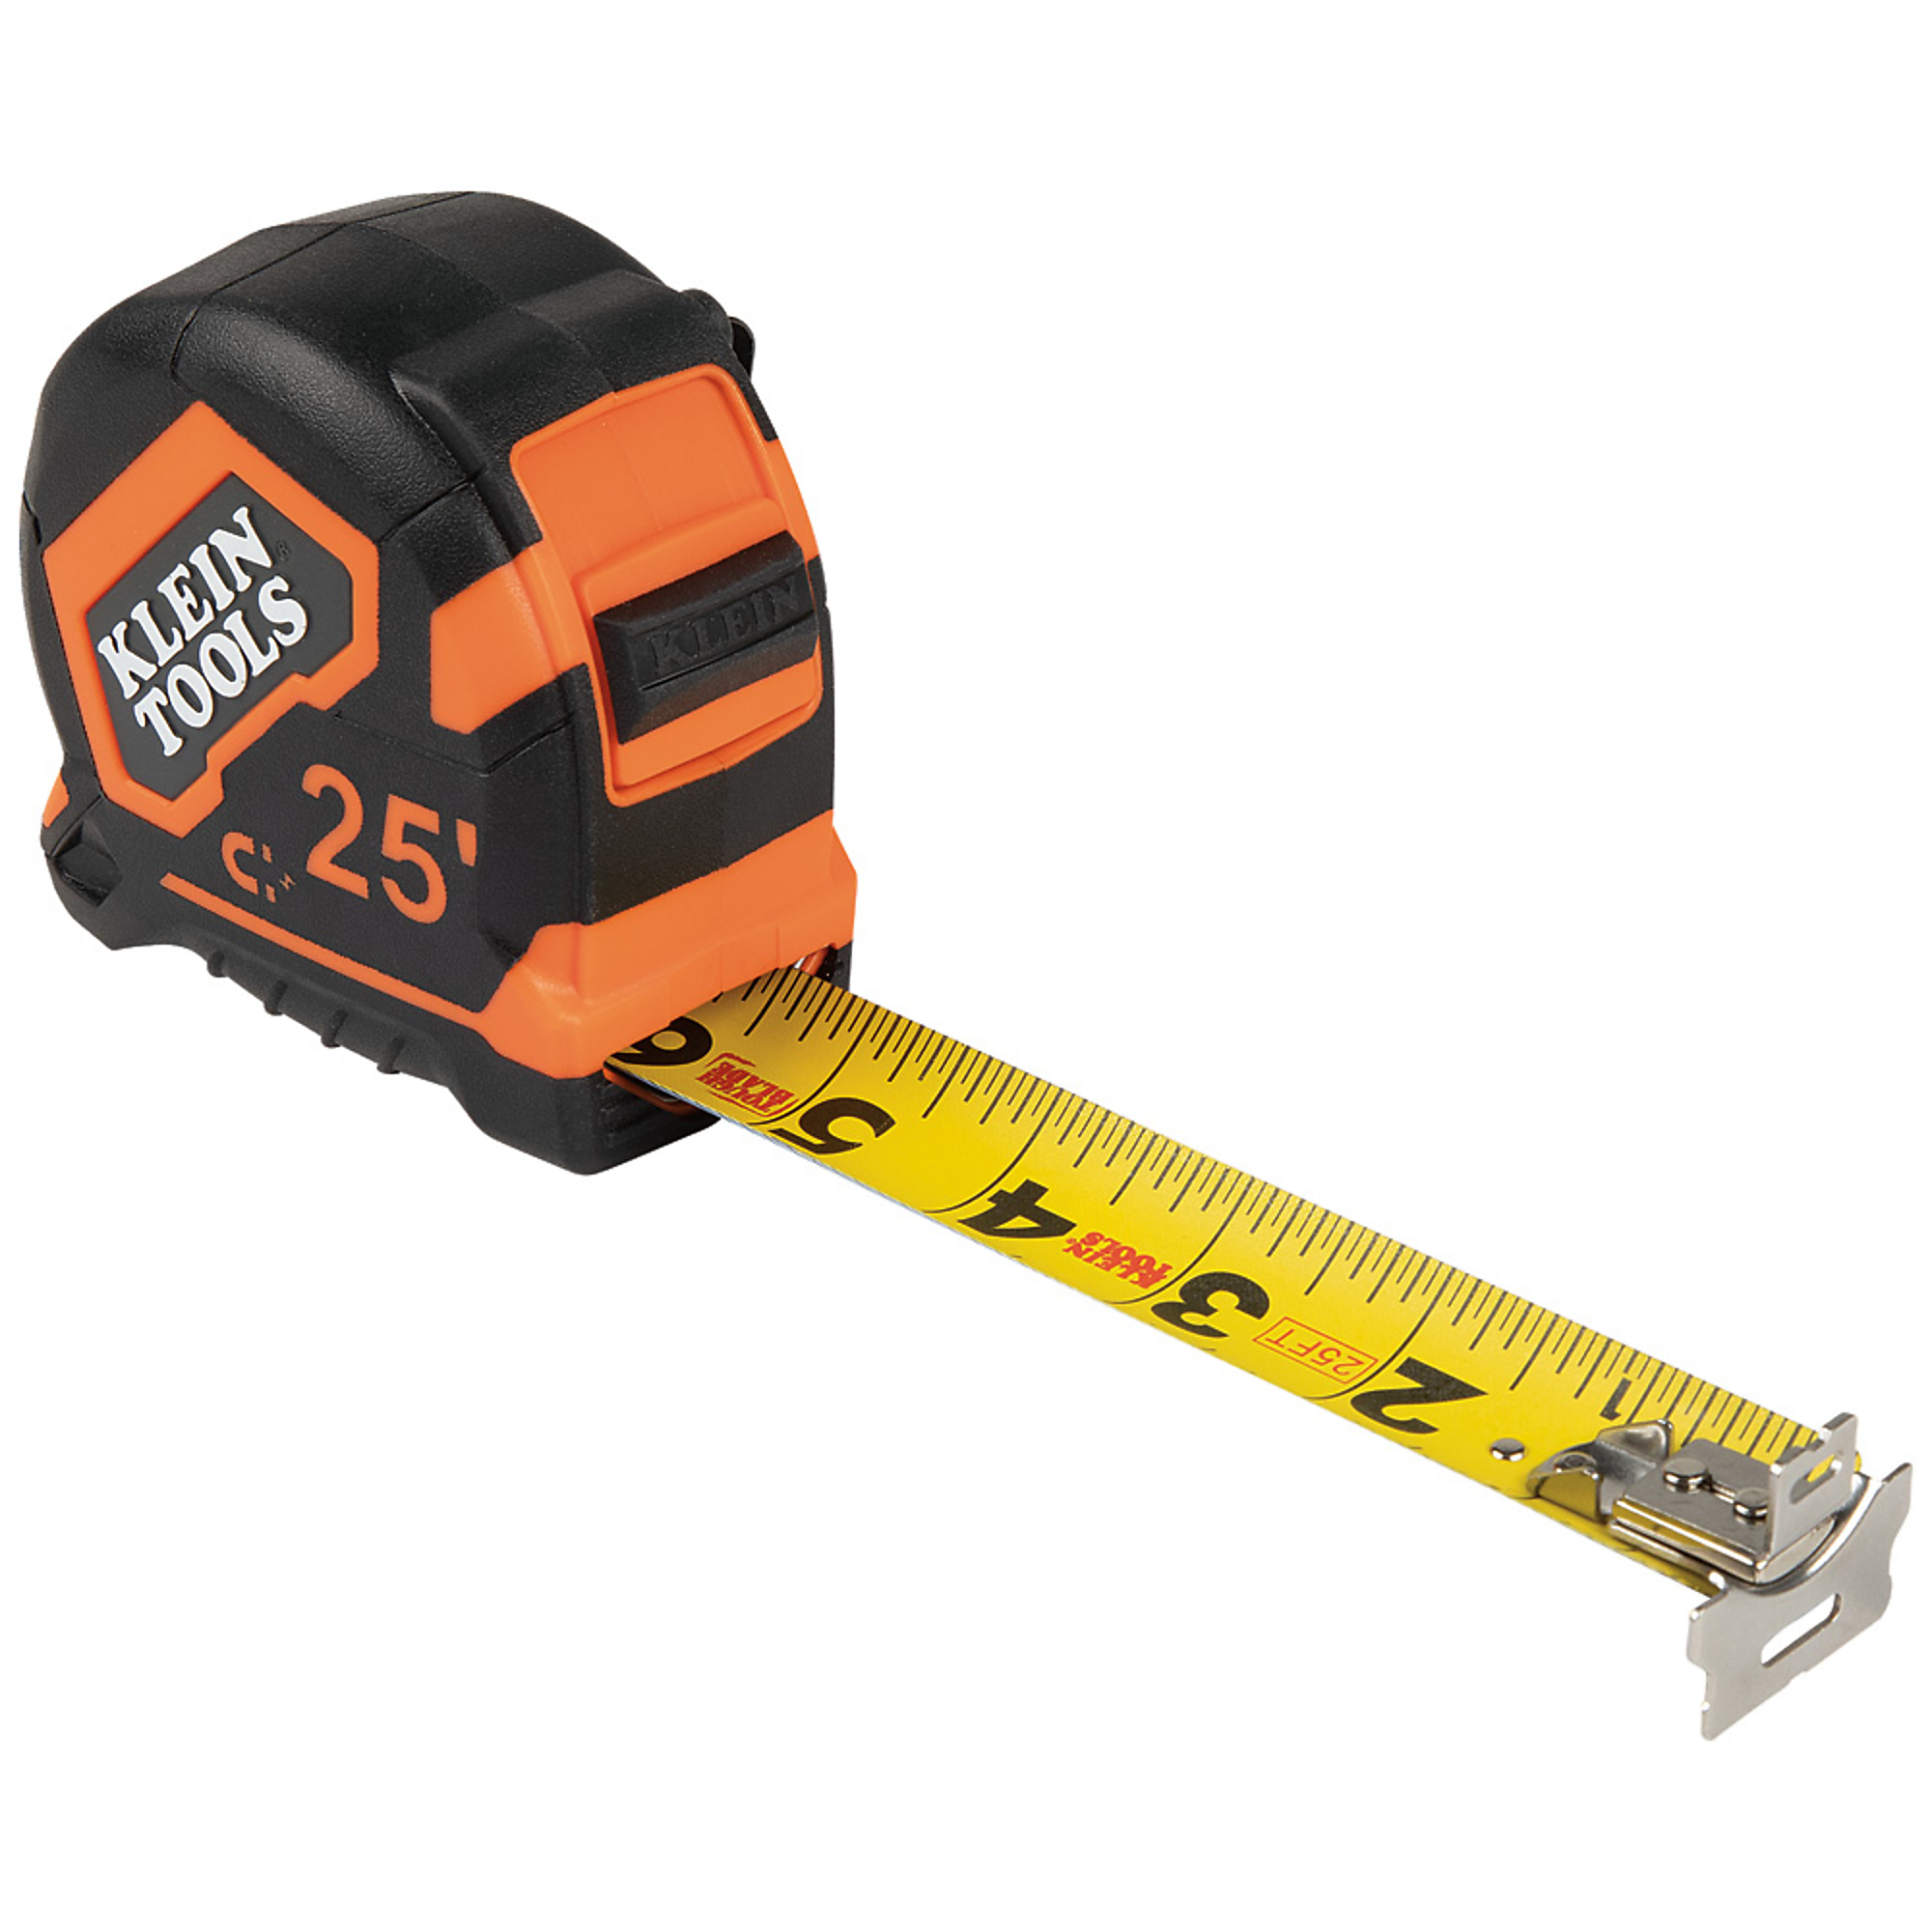 Klein Tools, Tape Measure, 25ft. Magnetic Double-Hook, Length 25 ft, Measures Up To 25 ft, Model 9225